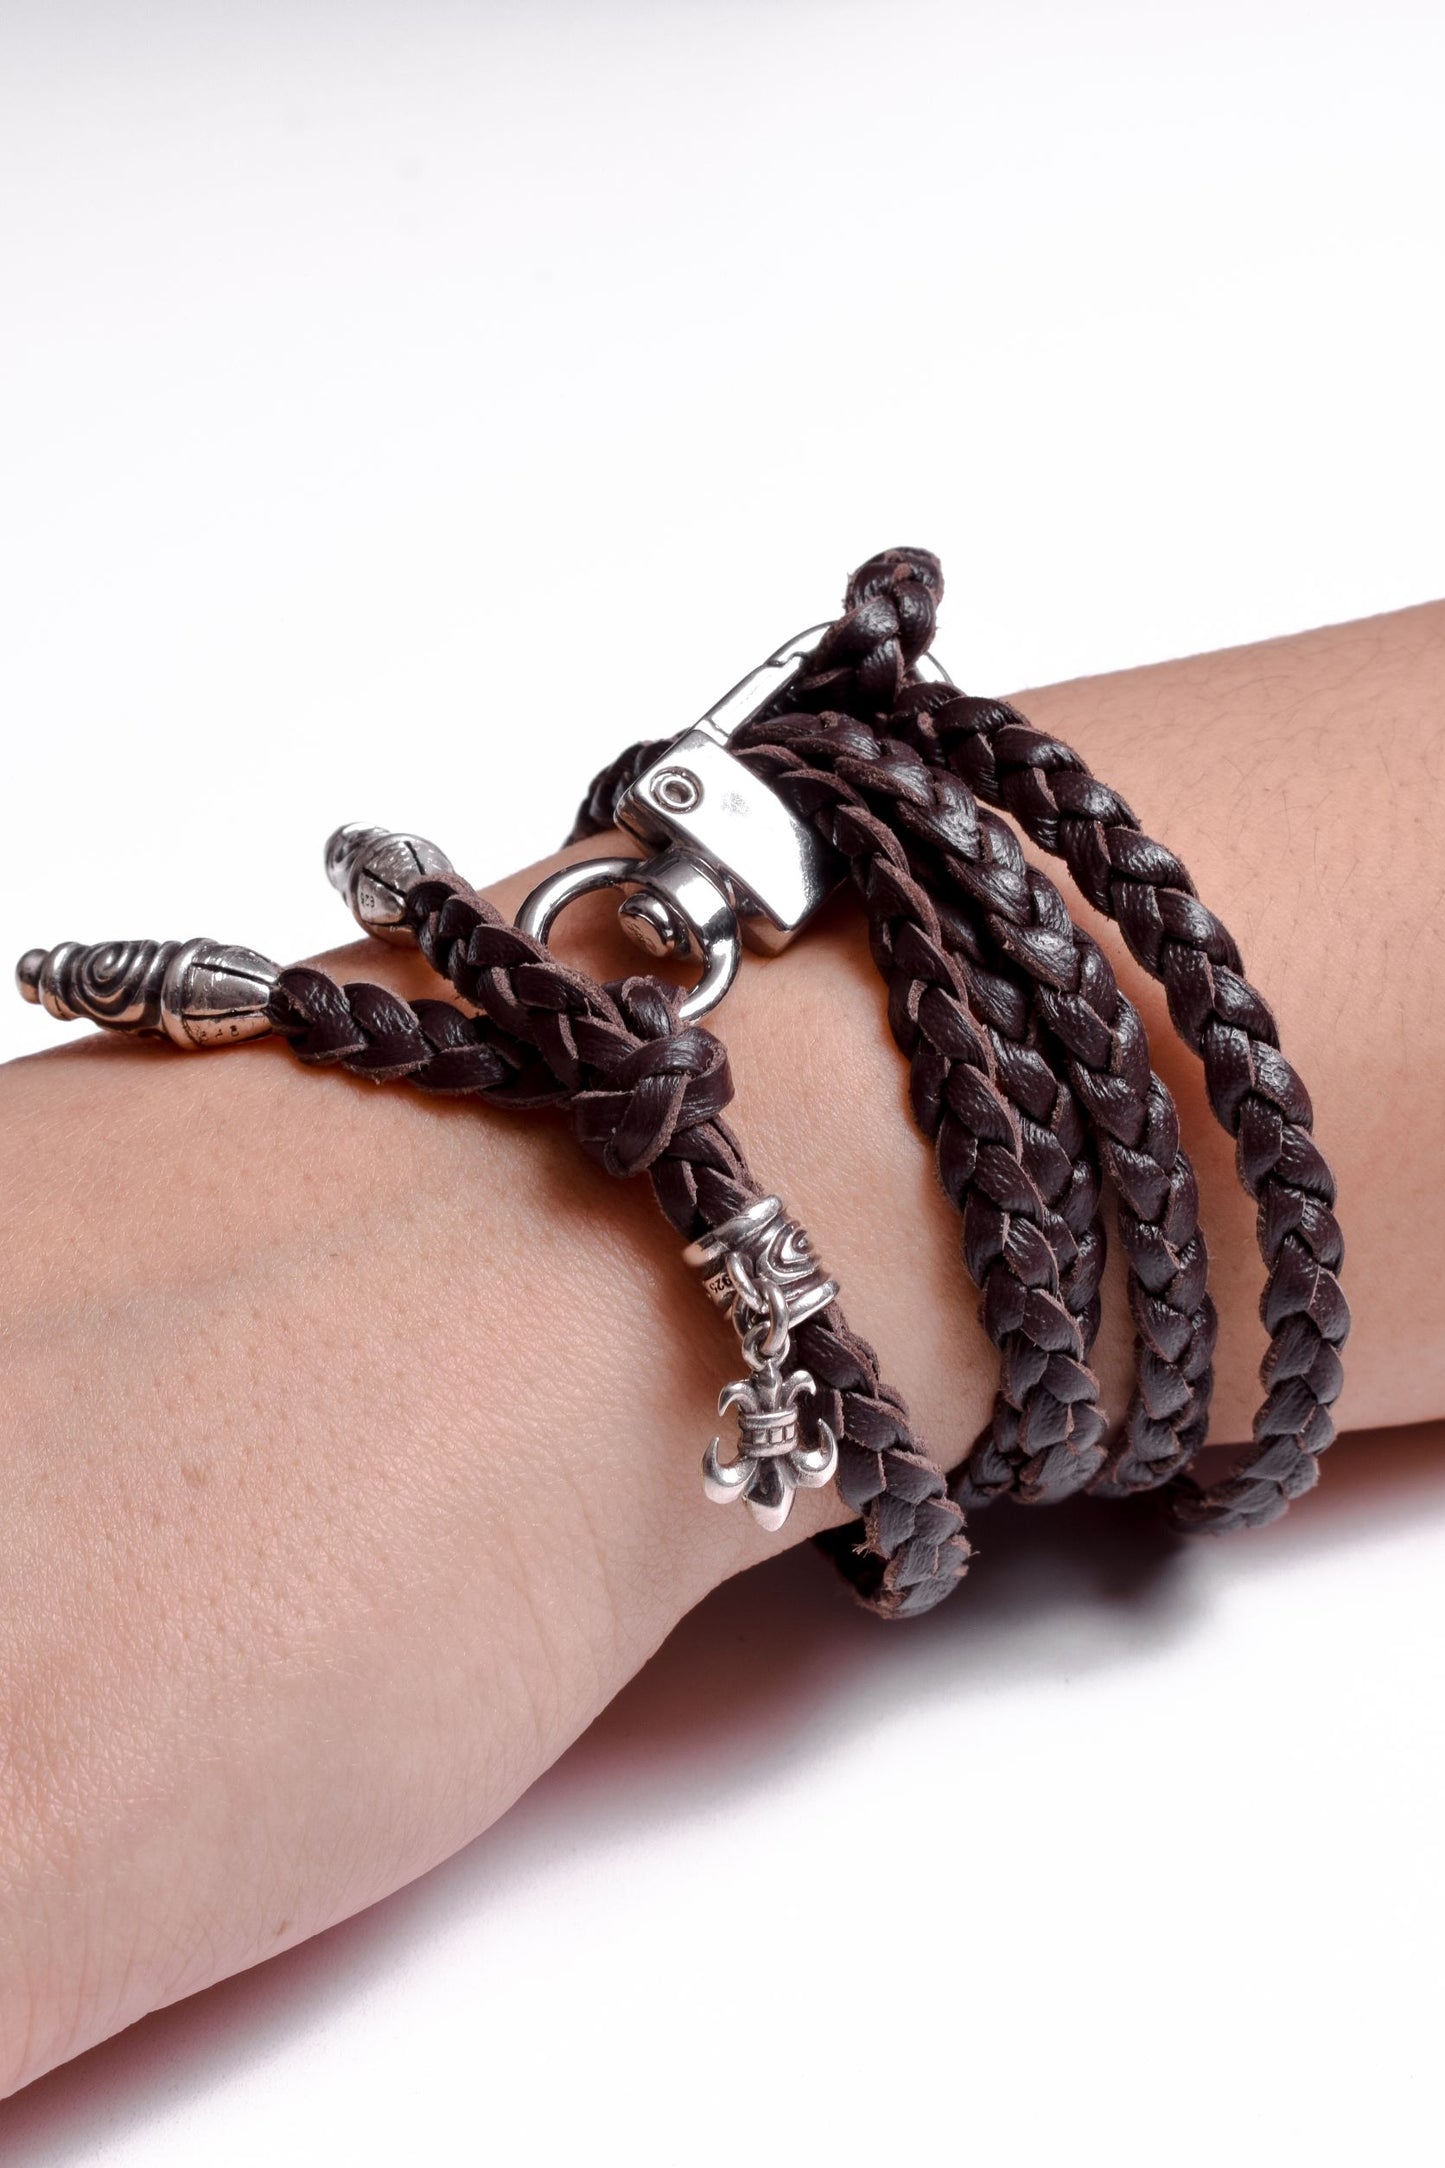 Laser-engraved Silicone Smartphone Support & Genuine Leather Bracelet/Crossbody/Necklace 3 double hand-braided strands, Brown, or Black. 2 Spiral Terminals, 1 Pin, and a Fleur de Lys pendant, all made of 925 Sterling Silver.- S45 ​